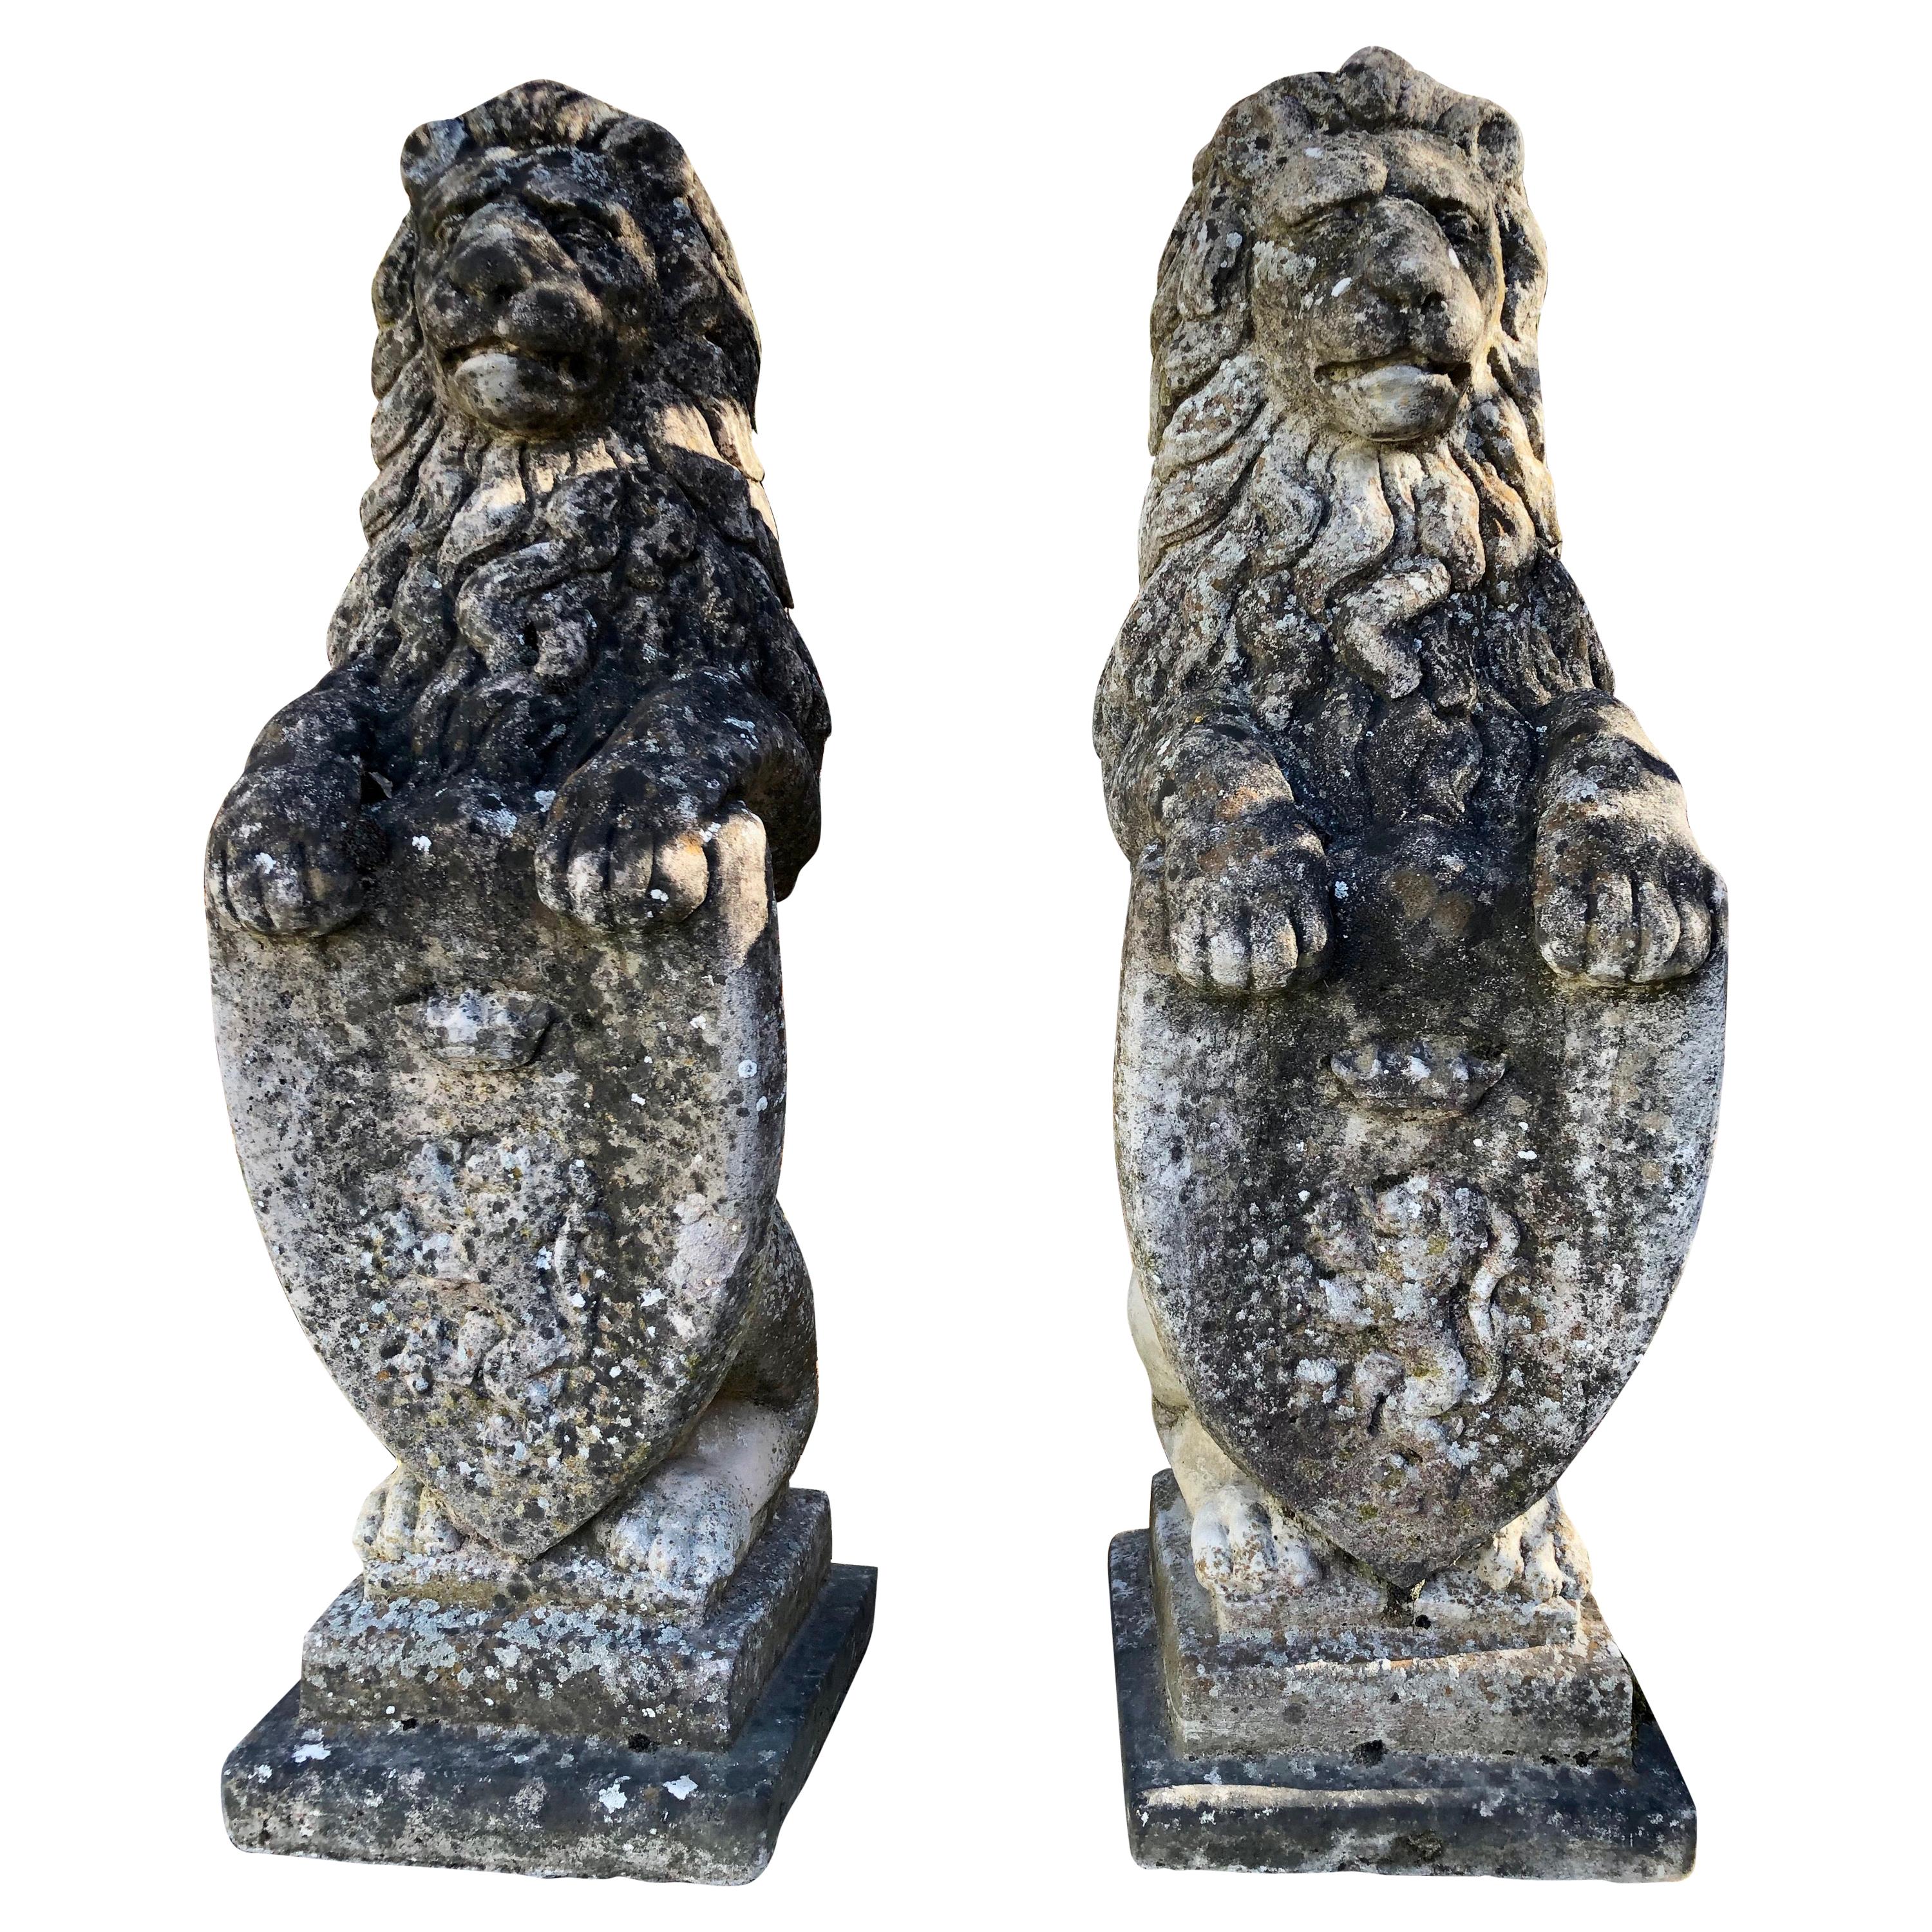 Pair of Heavily-Weathered and Lichened English Cast Stone Armorial Lions